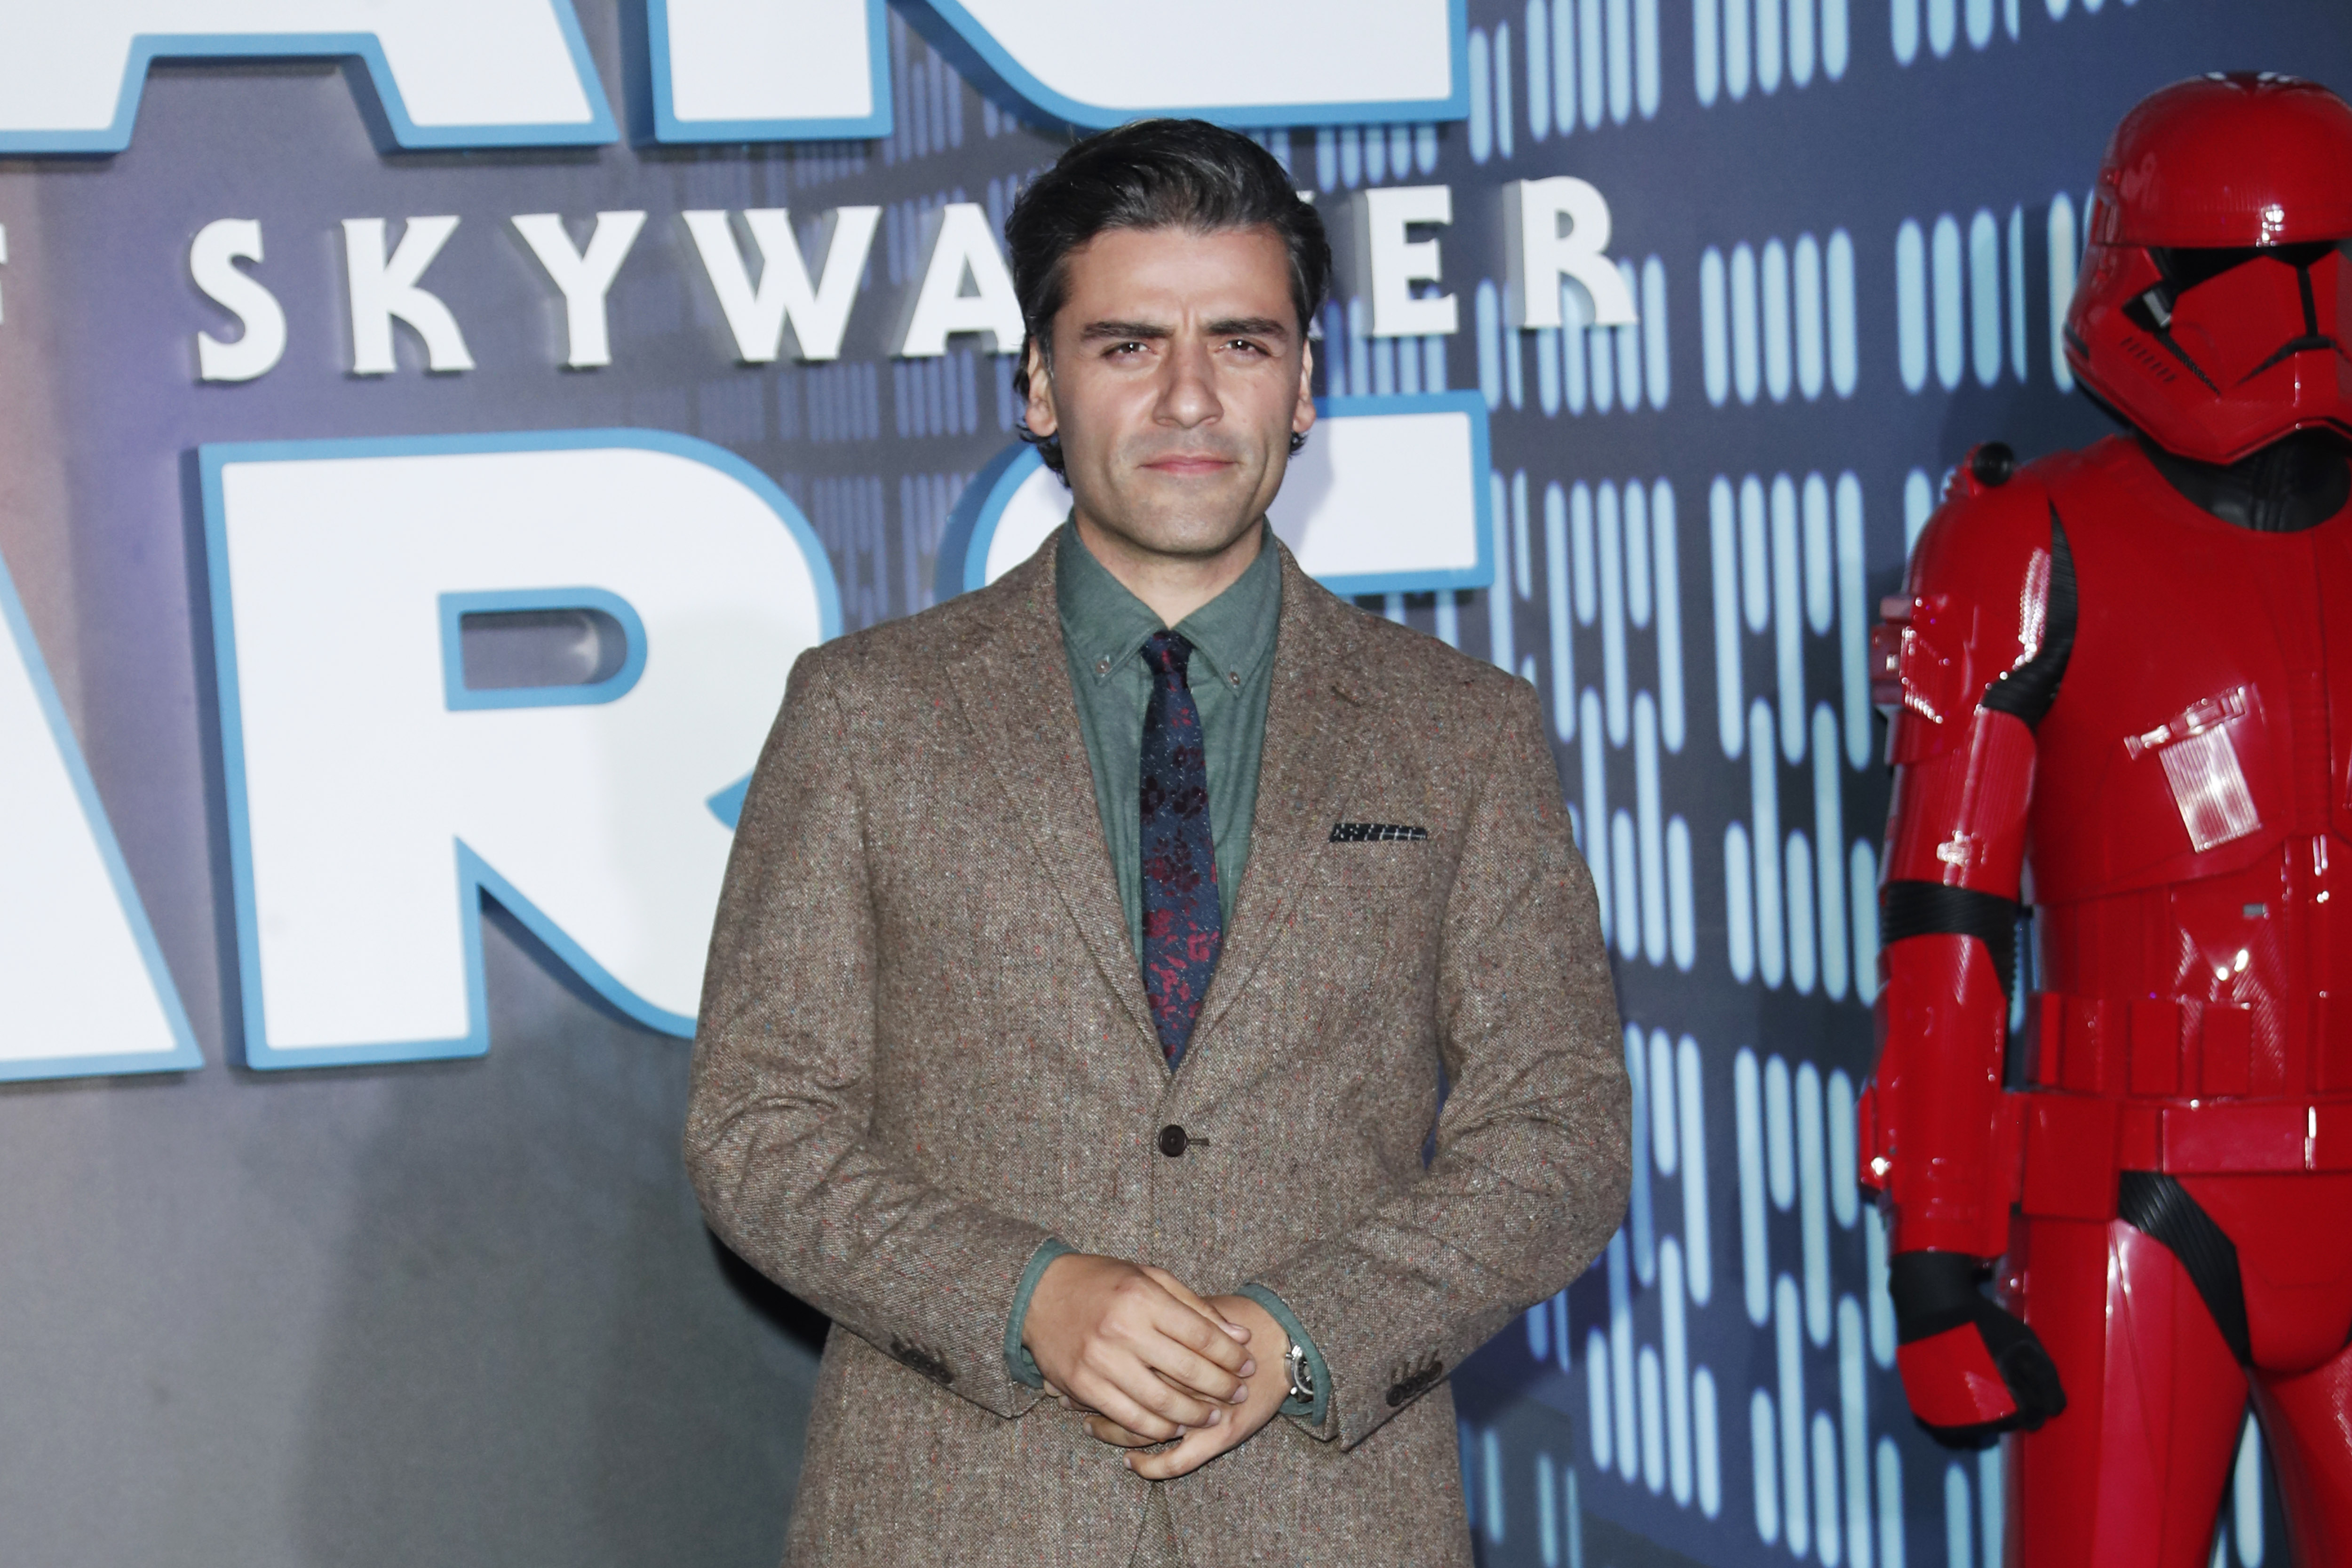 Oscar Isaac, who plays Moon Knight, attends the premiere of Star Wars Episode IX: The Rise of Skywalker